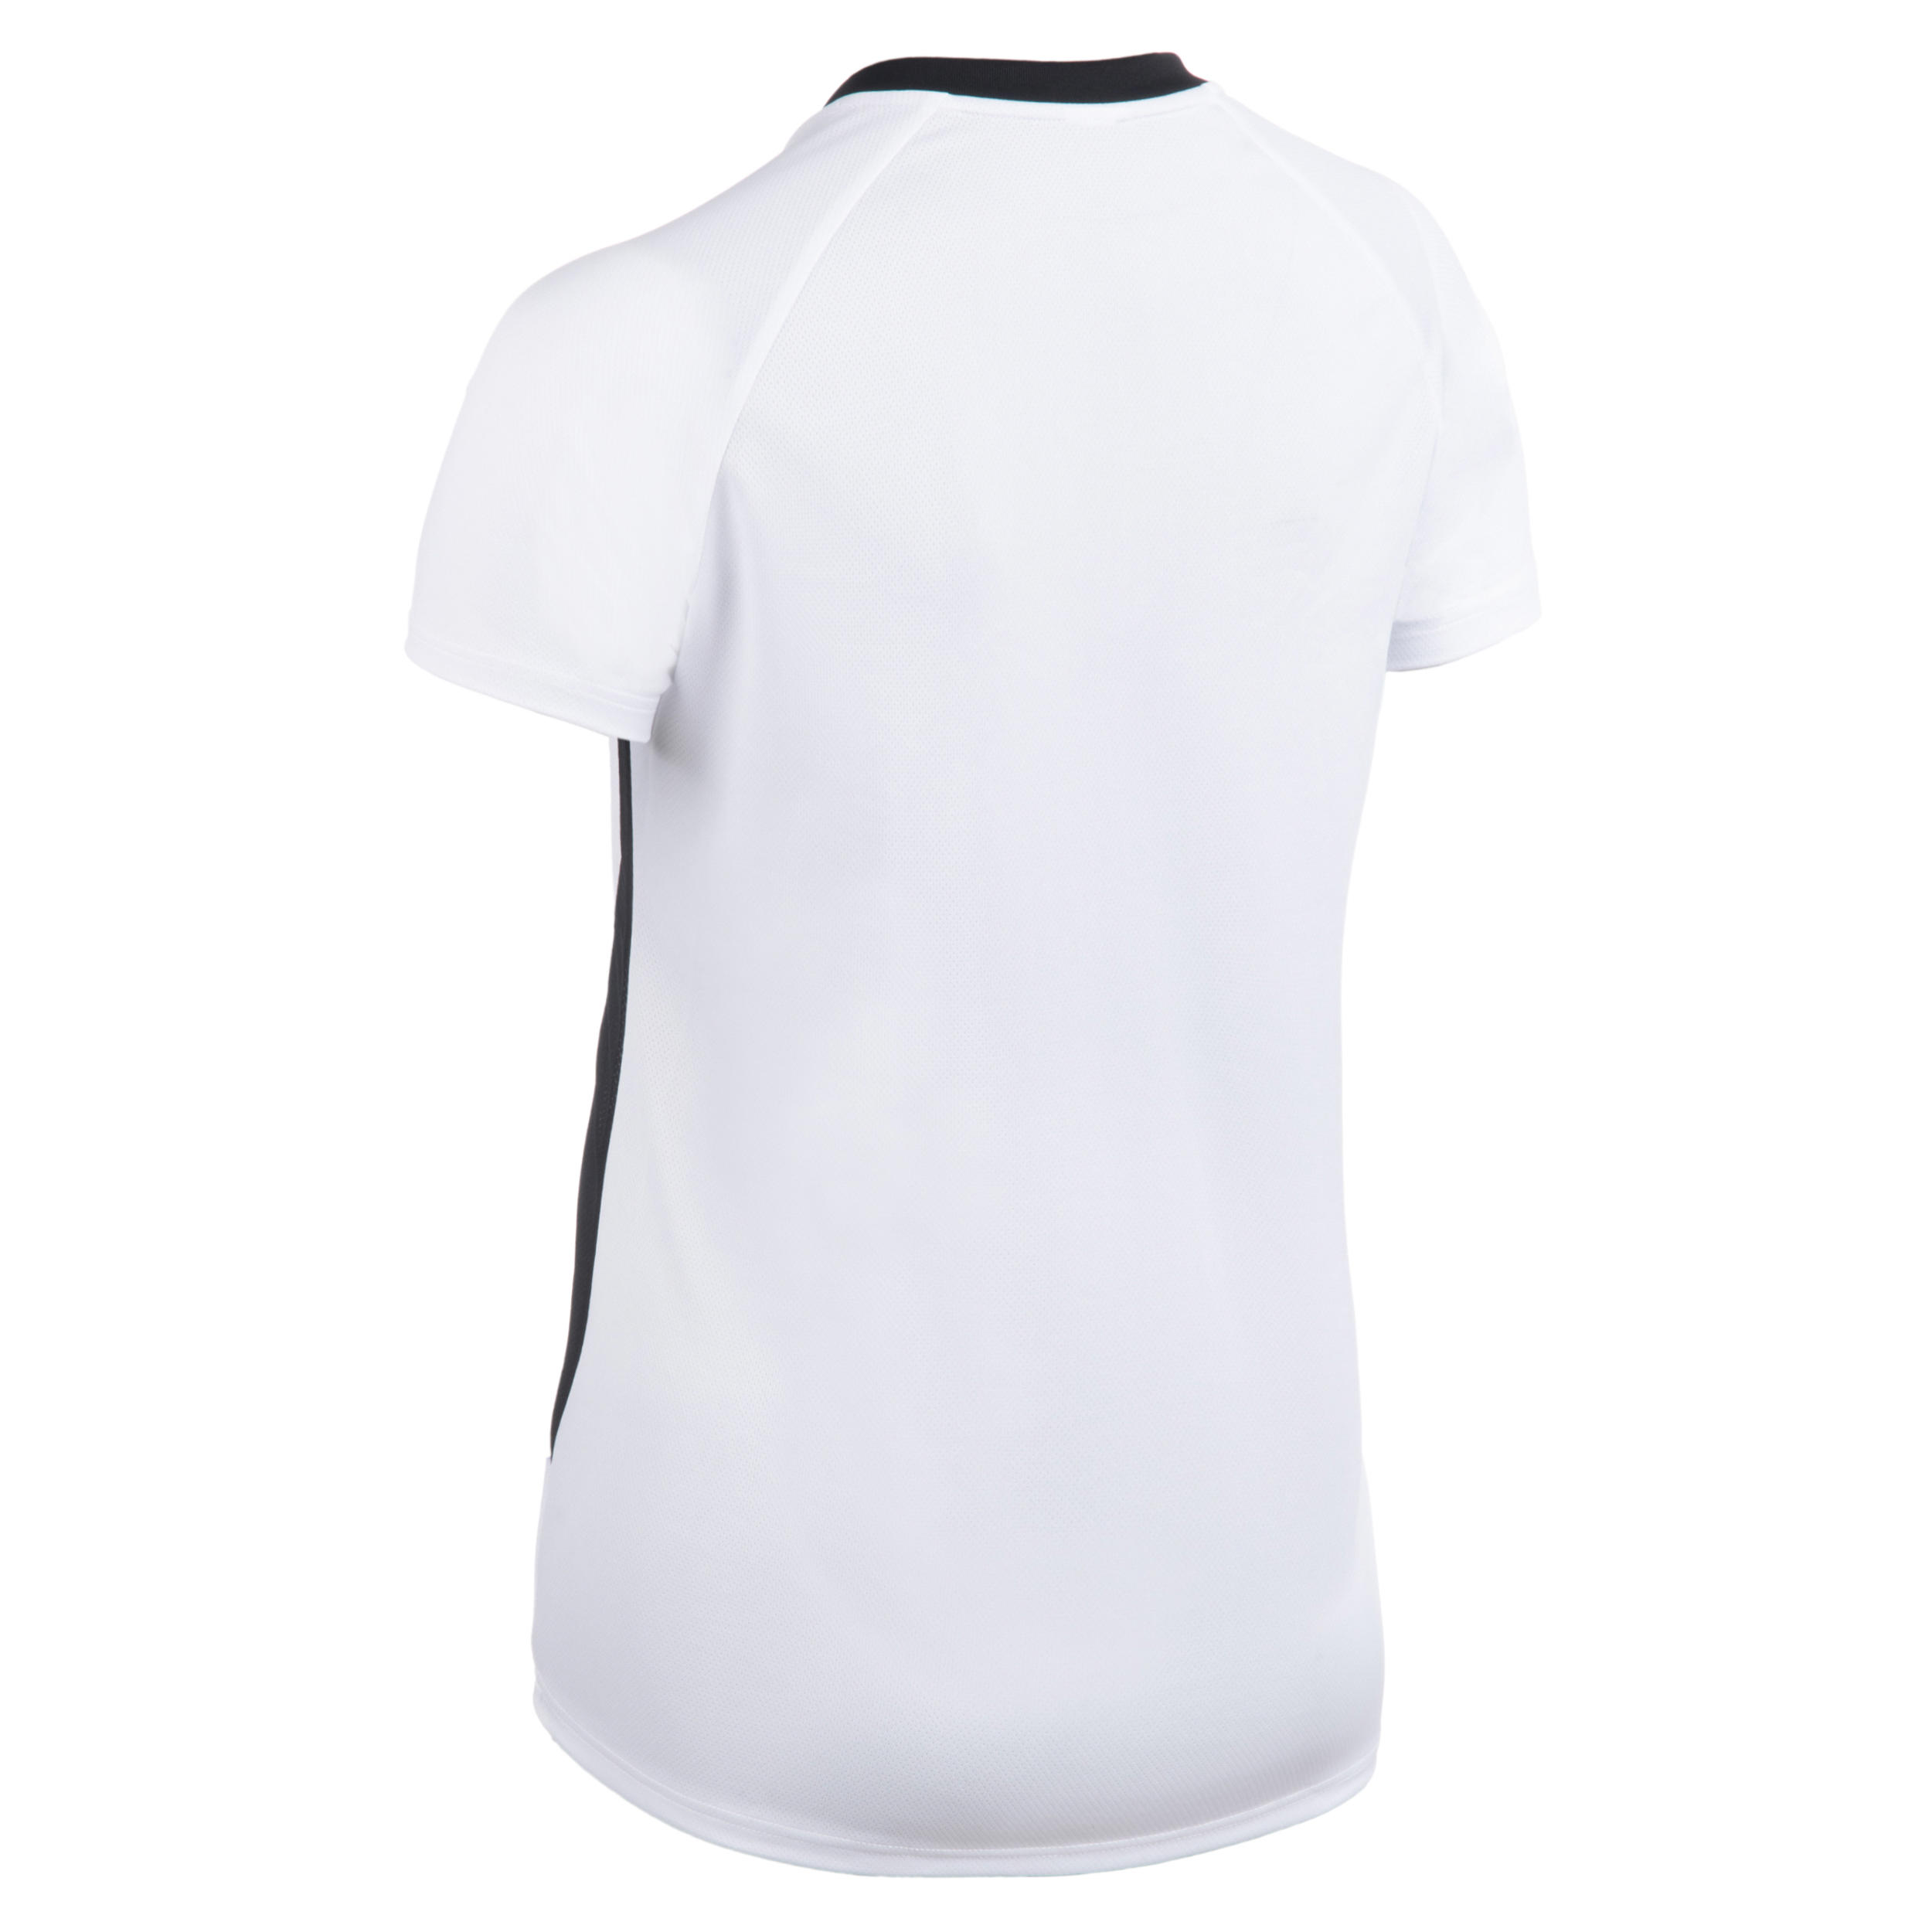 V100 Women's Volleyball Jersey - White 2/7